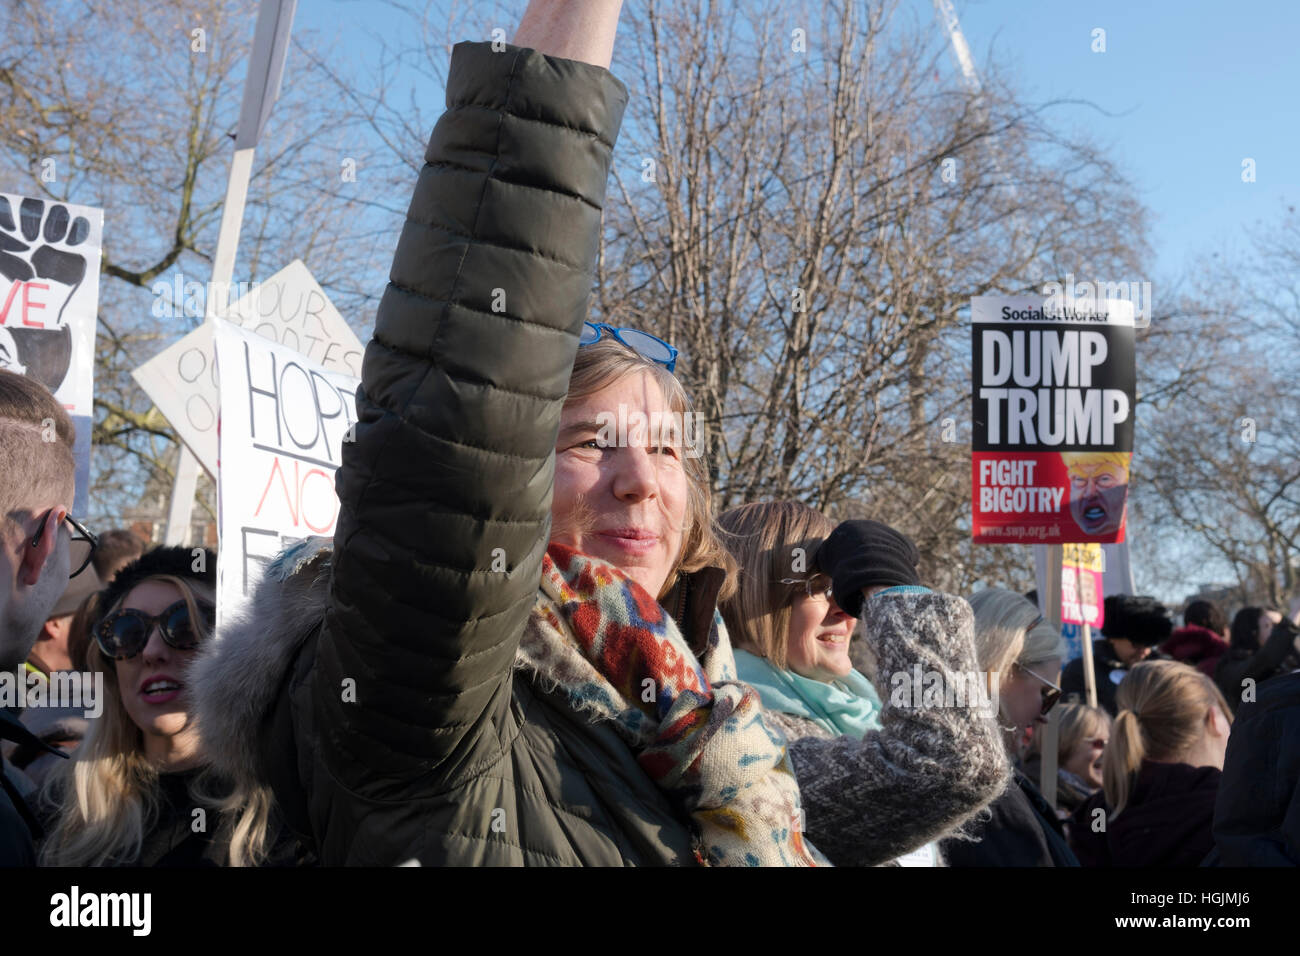 London, UK. 21st January, 2017. Anti Trump protestors in the Women's March in London the day after Donald Trump's inauguration in Grosvenor Square, London, UK Credit: Ellen Rooney/Alamy Live News Stock Photo